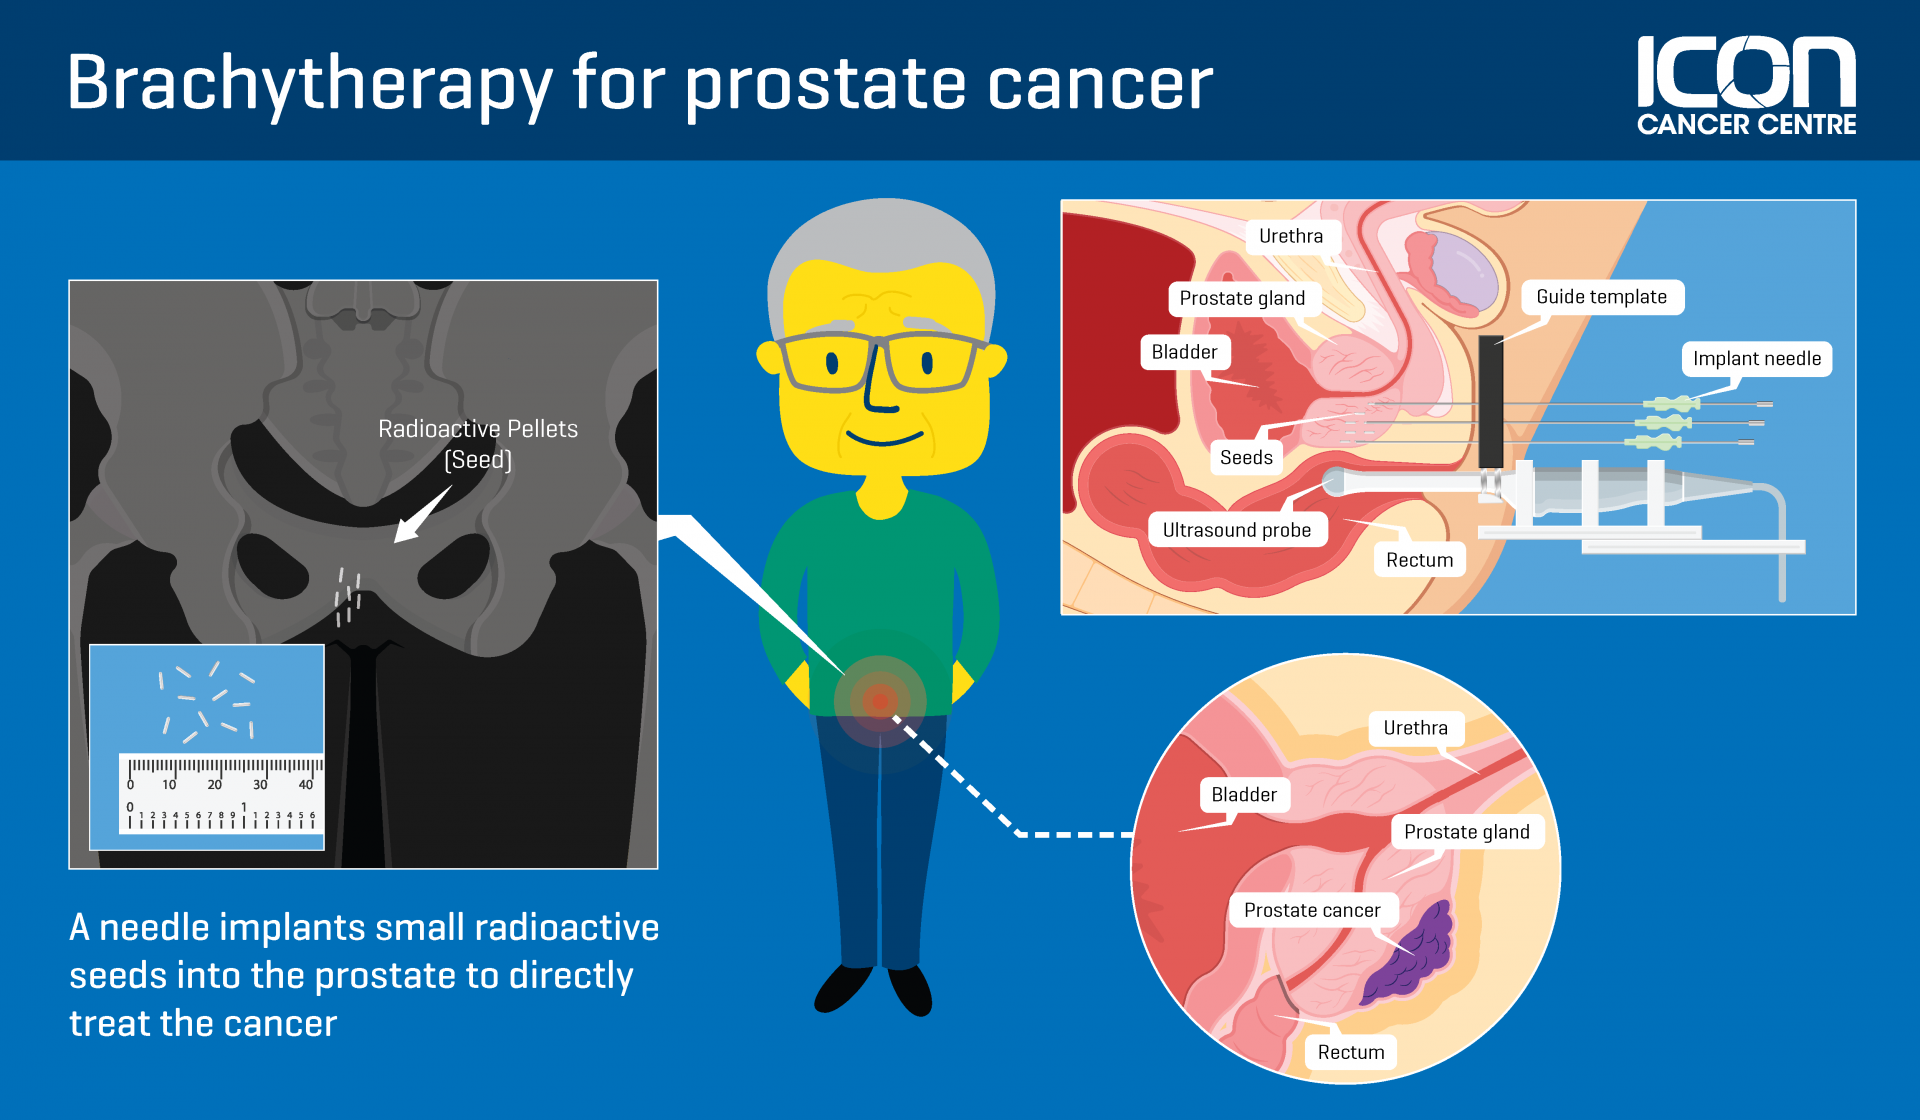 focal-brachytherapy-for-prostate-cancer-icon-cancer-centre